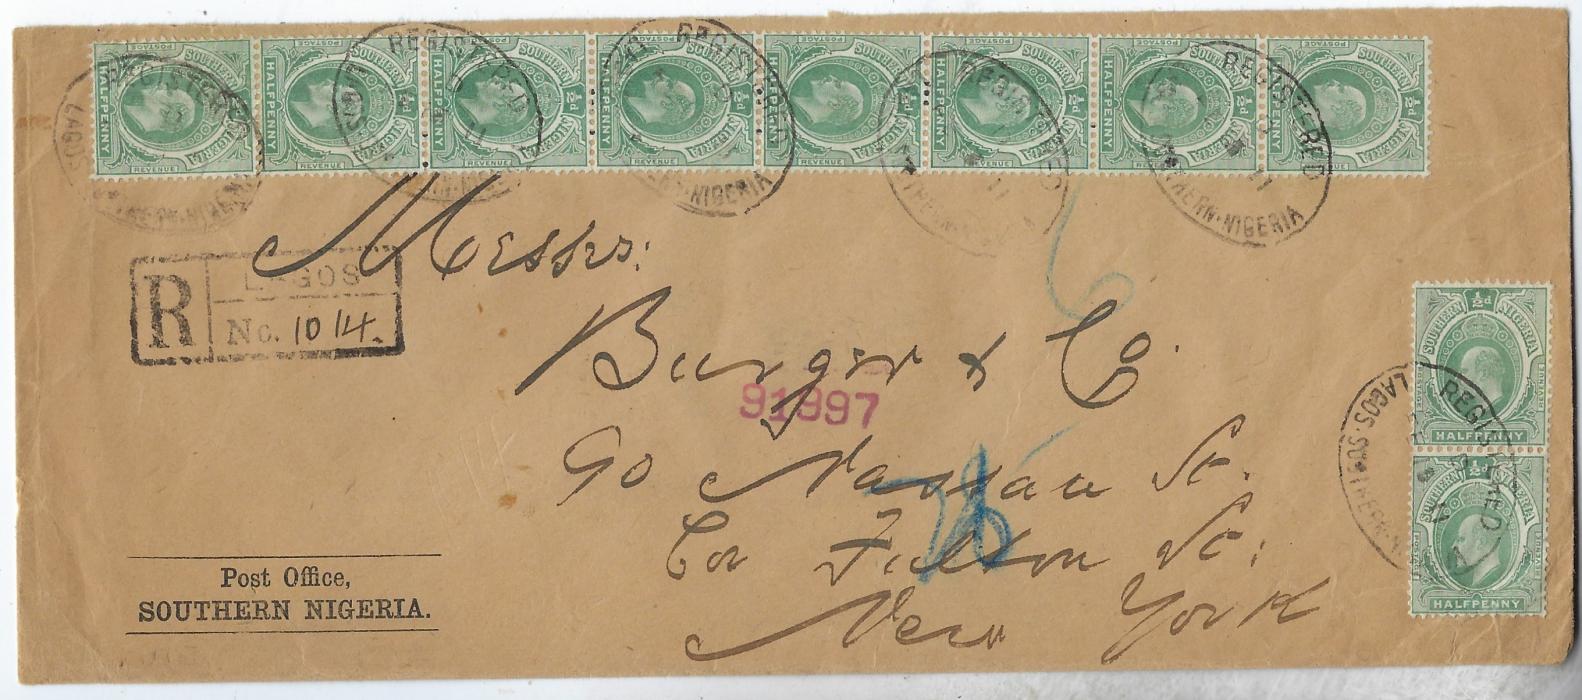 Nigeria (Southern) 1911 ‘Post Office’ OHMS envelope to New York franked vertical pair and vertical strip of eight cancelled Registered Lagos date stamps., framed registration at left with manuscript number, reverse with London transit and arrival cds.